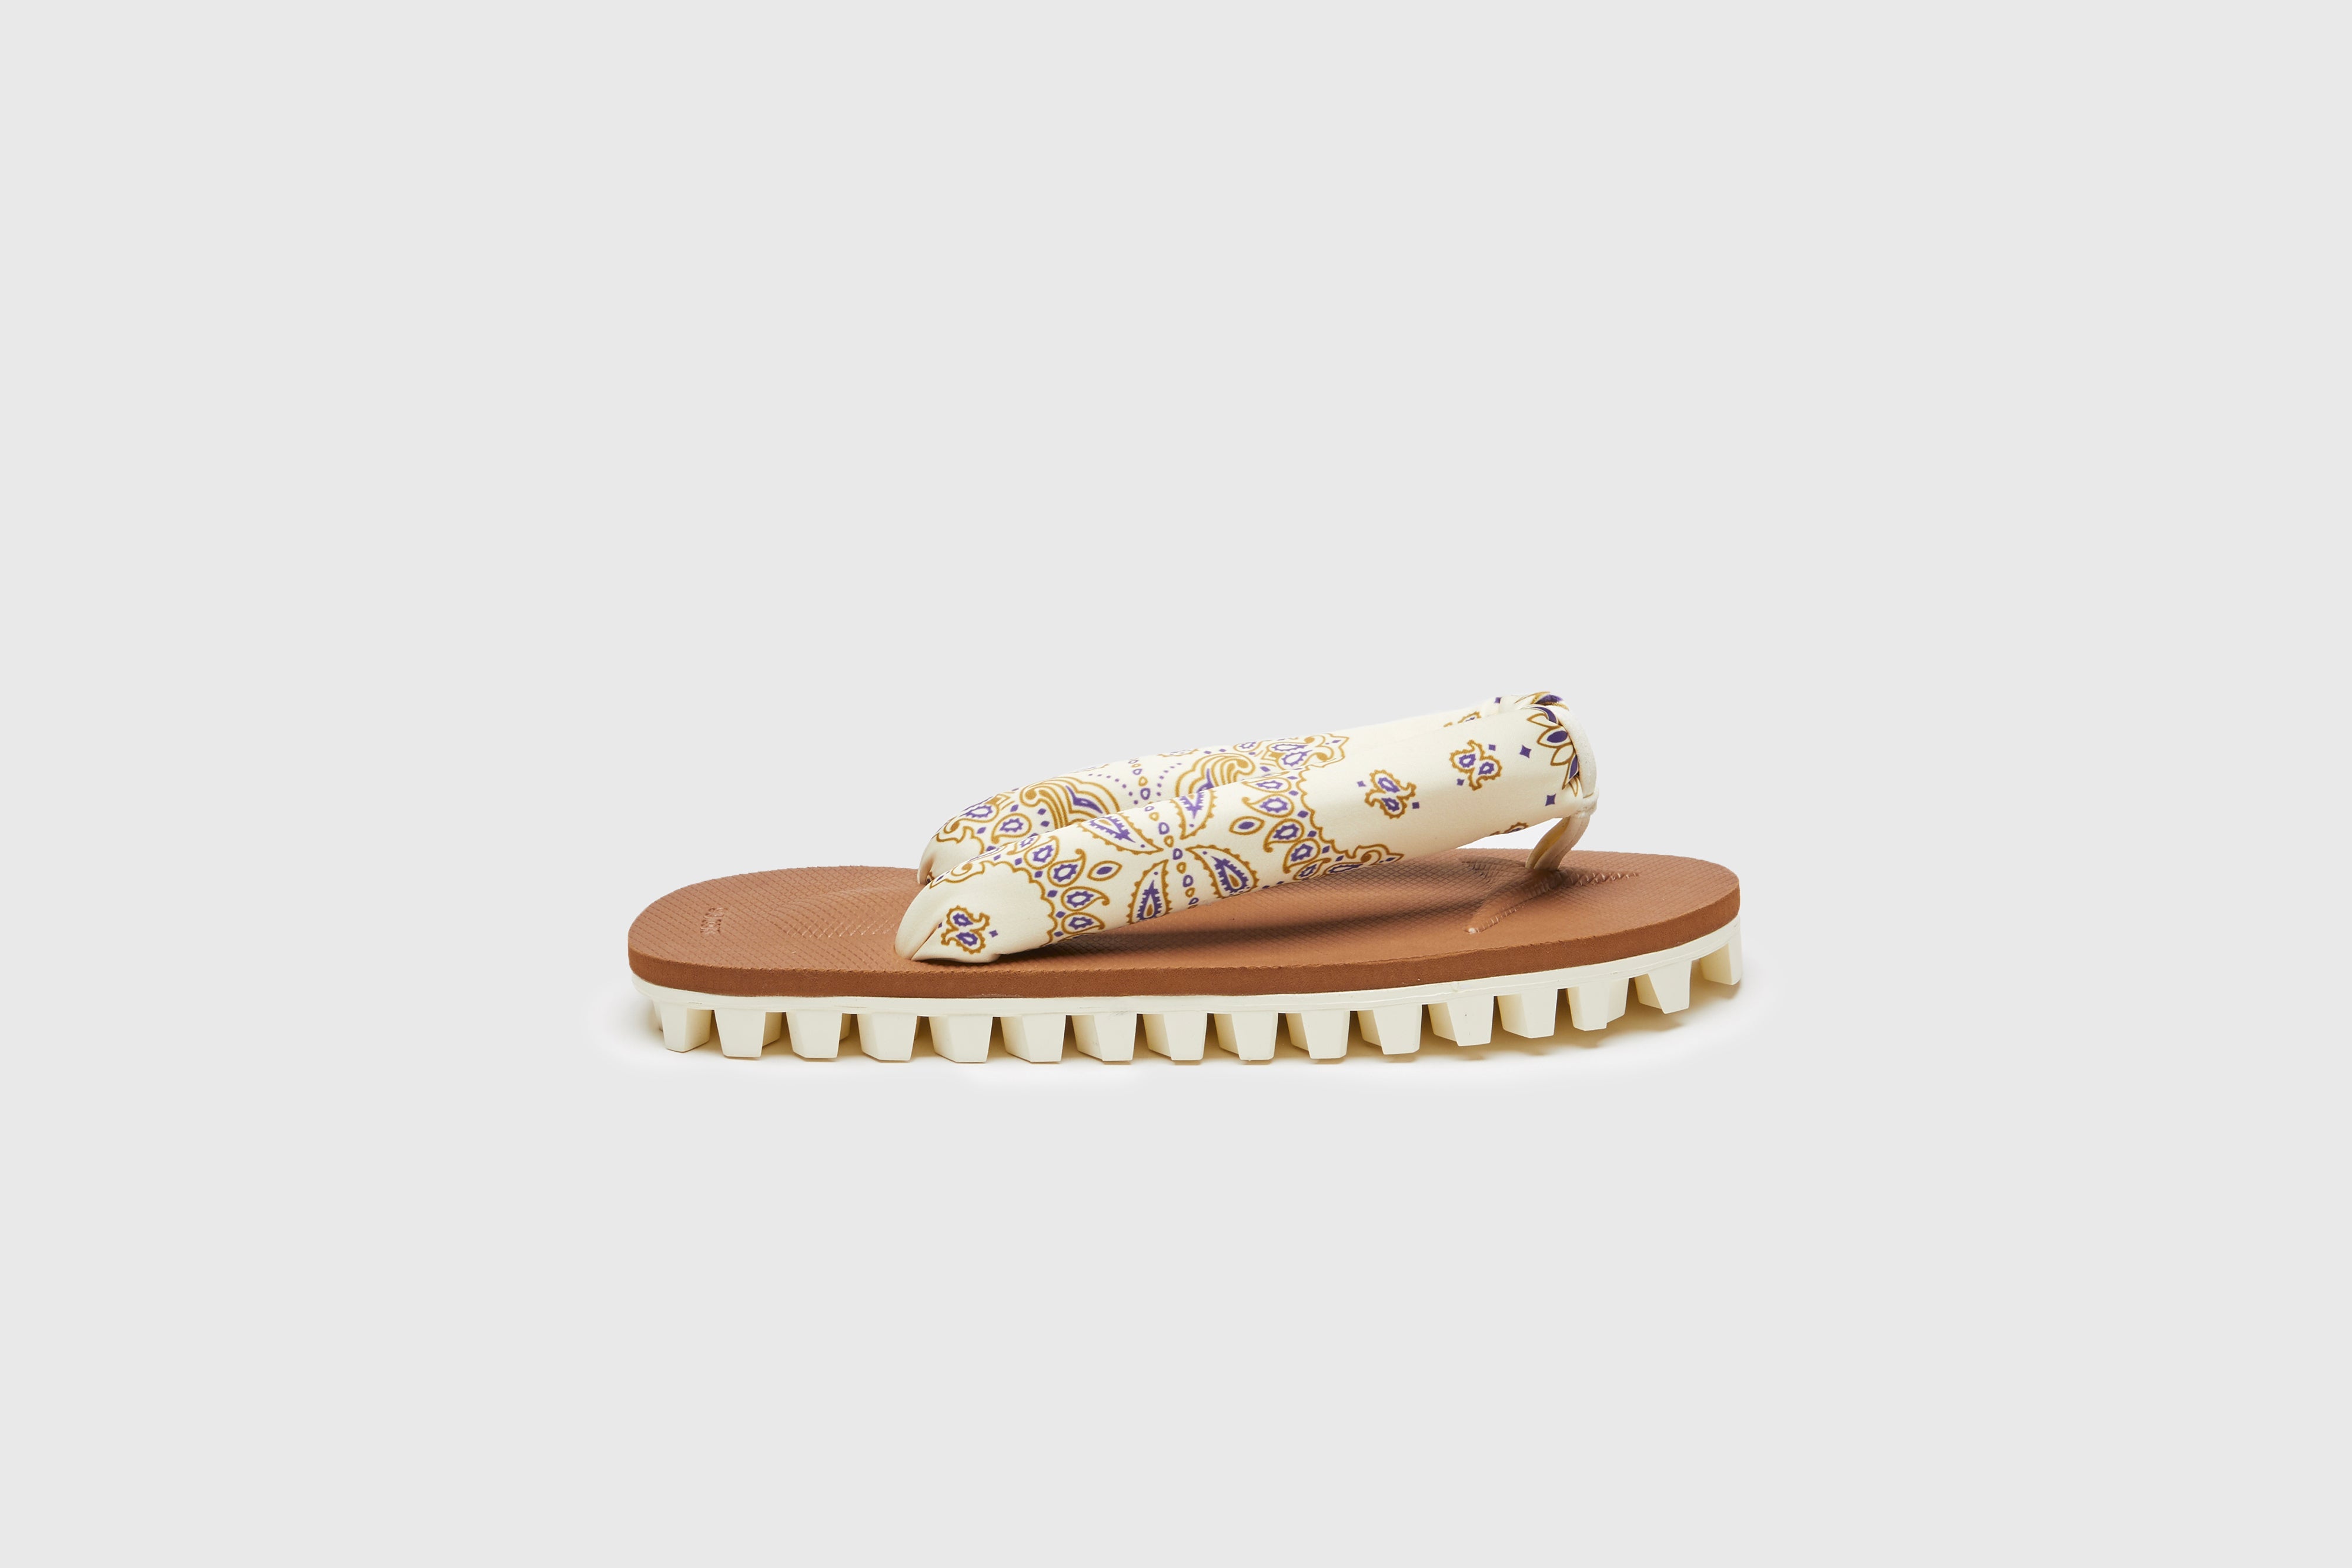 SUICOKE GTA-PT05 sandals with ivory & brown nylon upper, ivory & brown midsole and sole, straps and logo patch. From Spring/Summer 2023 collection on eightywingold Web Store, an official partner of SUICOKE. OG-226-PT05 IVORY X BROWN